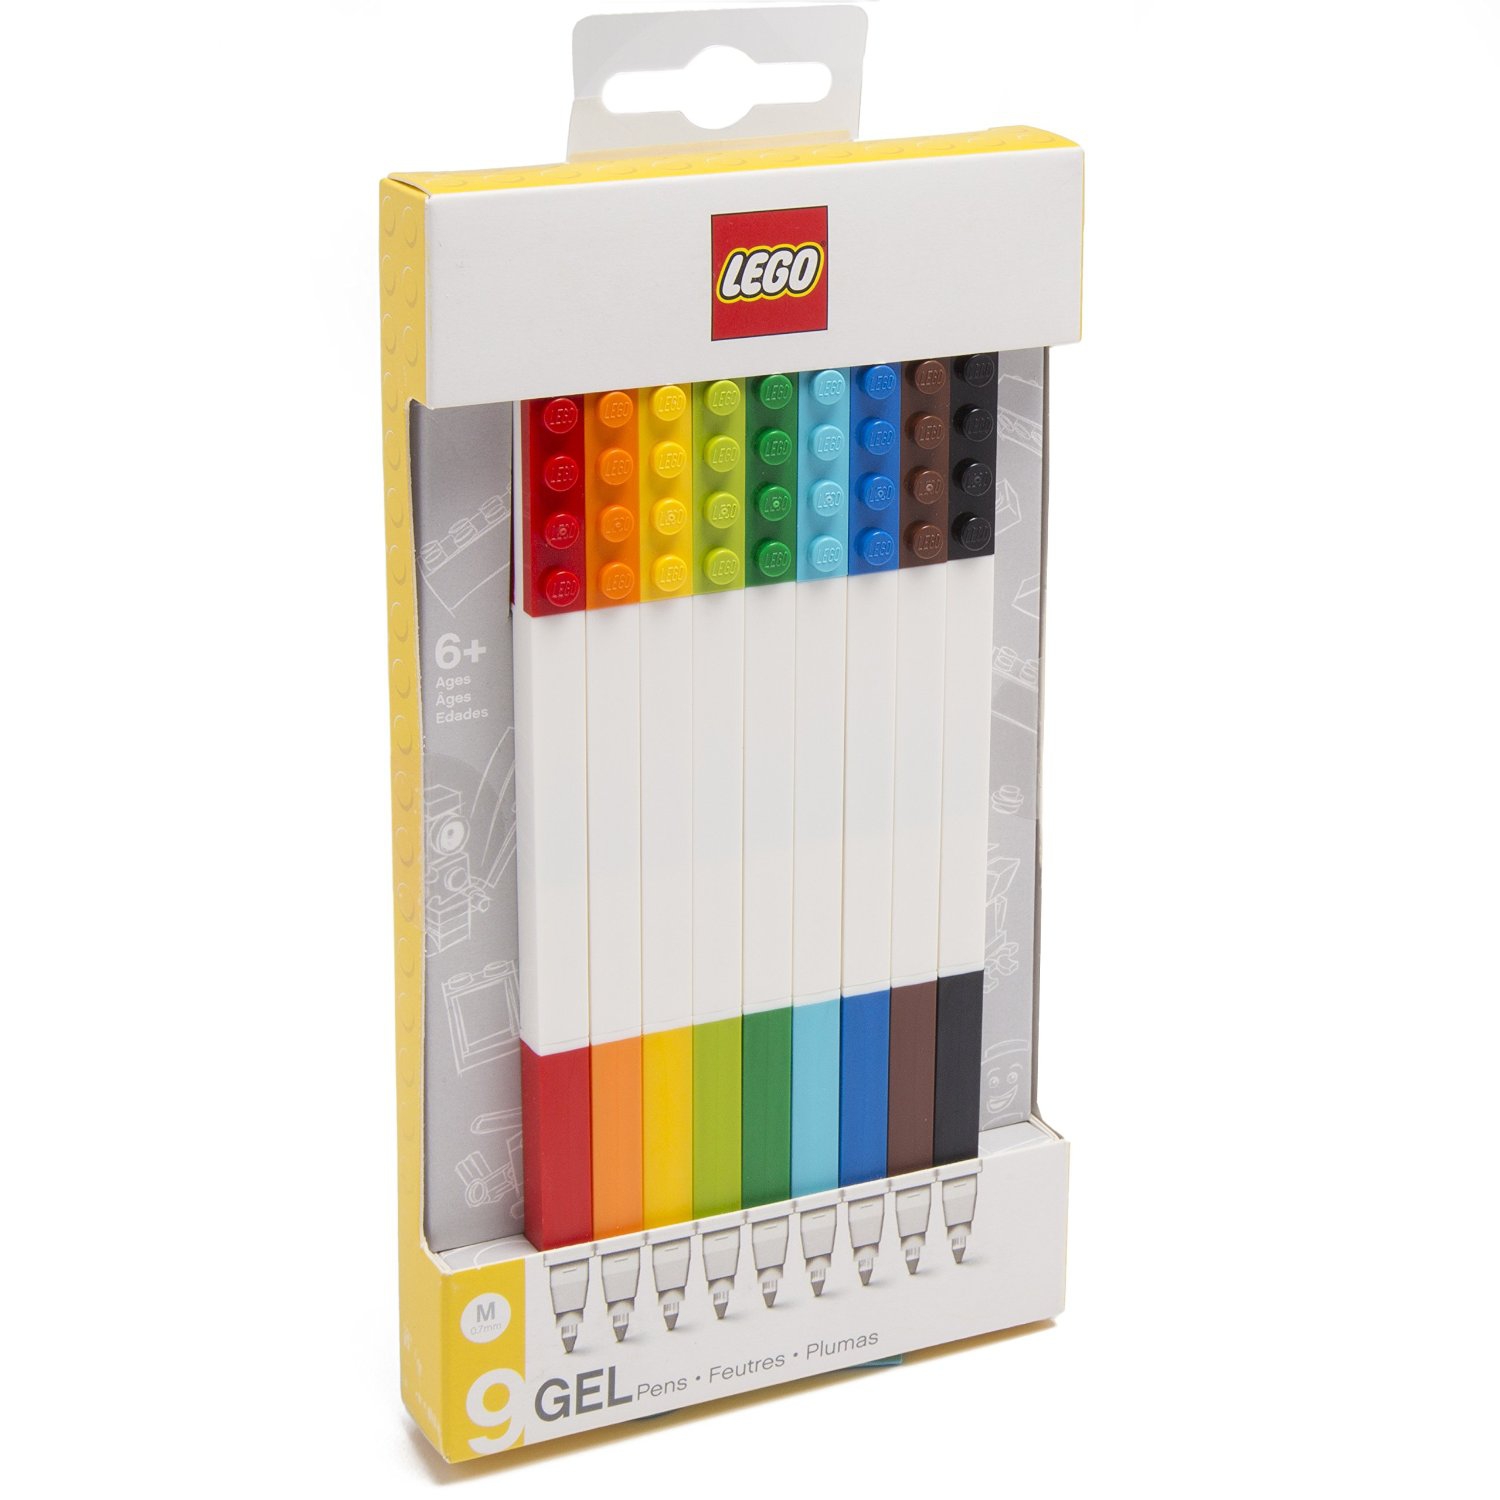 Lego 9 Pack 'Assorted Colours' Gel Pen Stationery